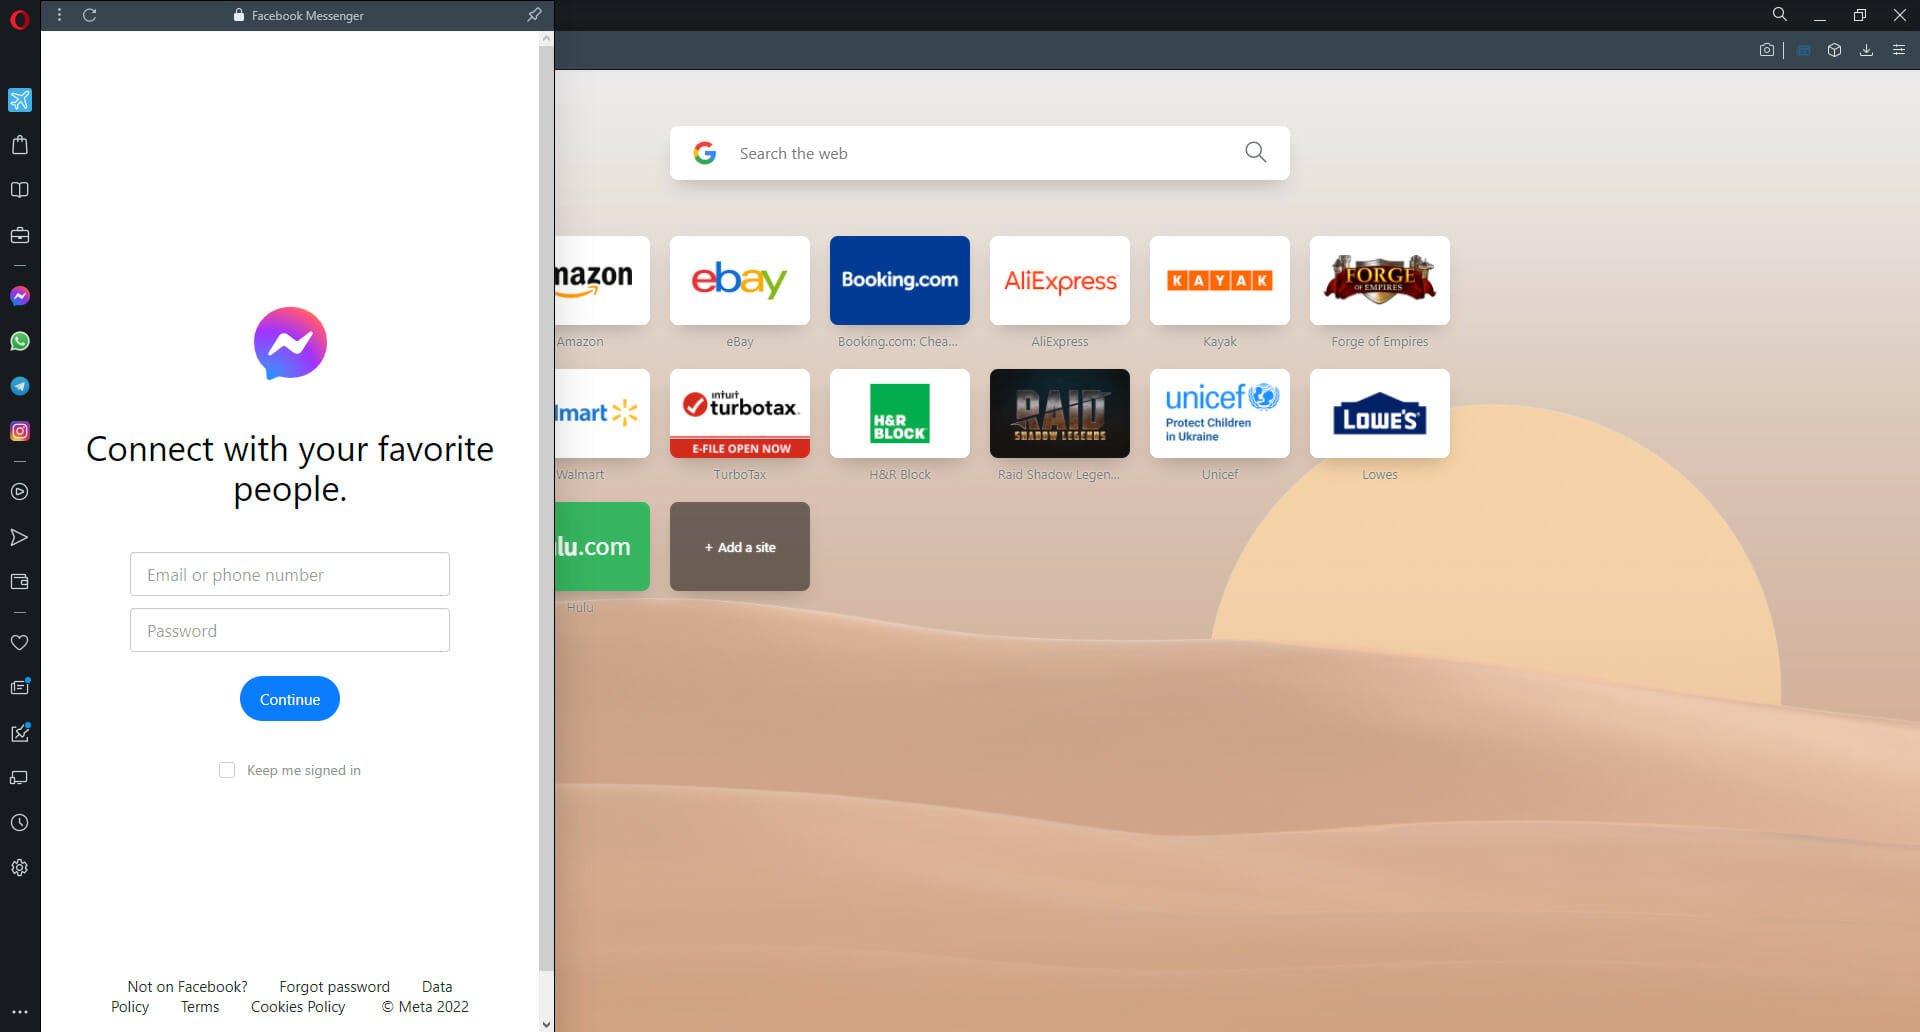 Consider switching to Opera Browser.